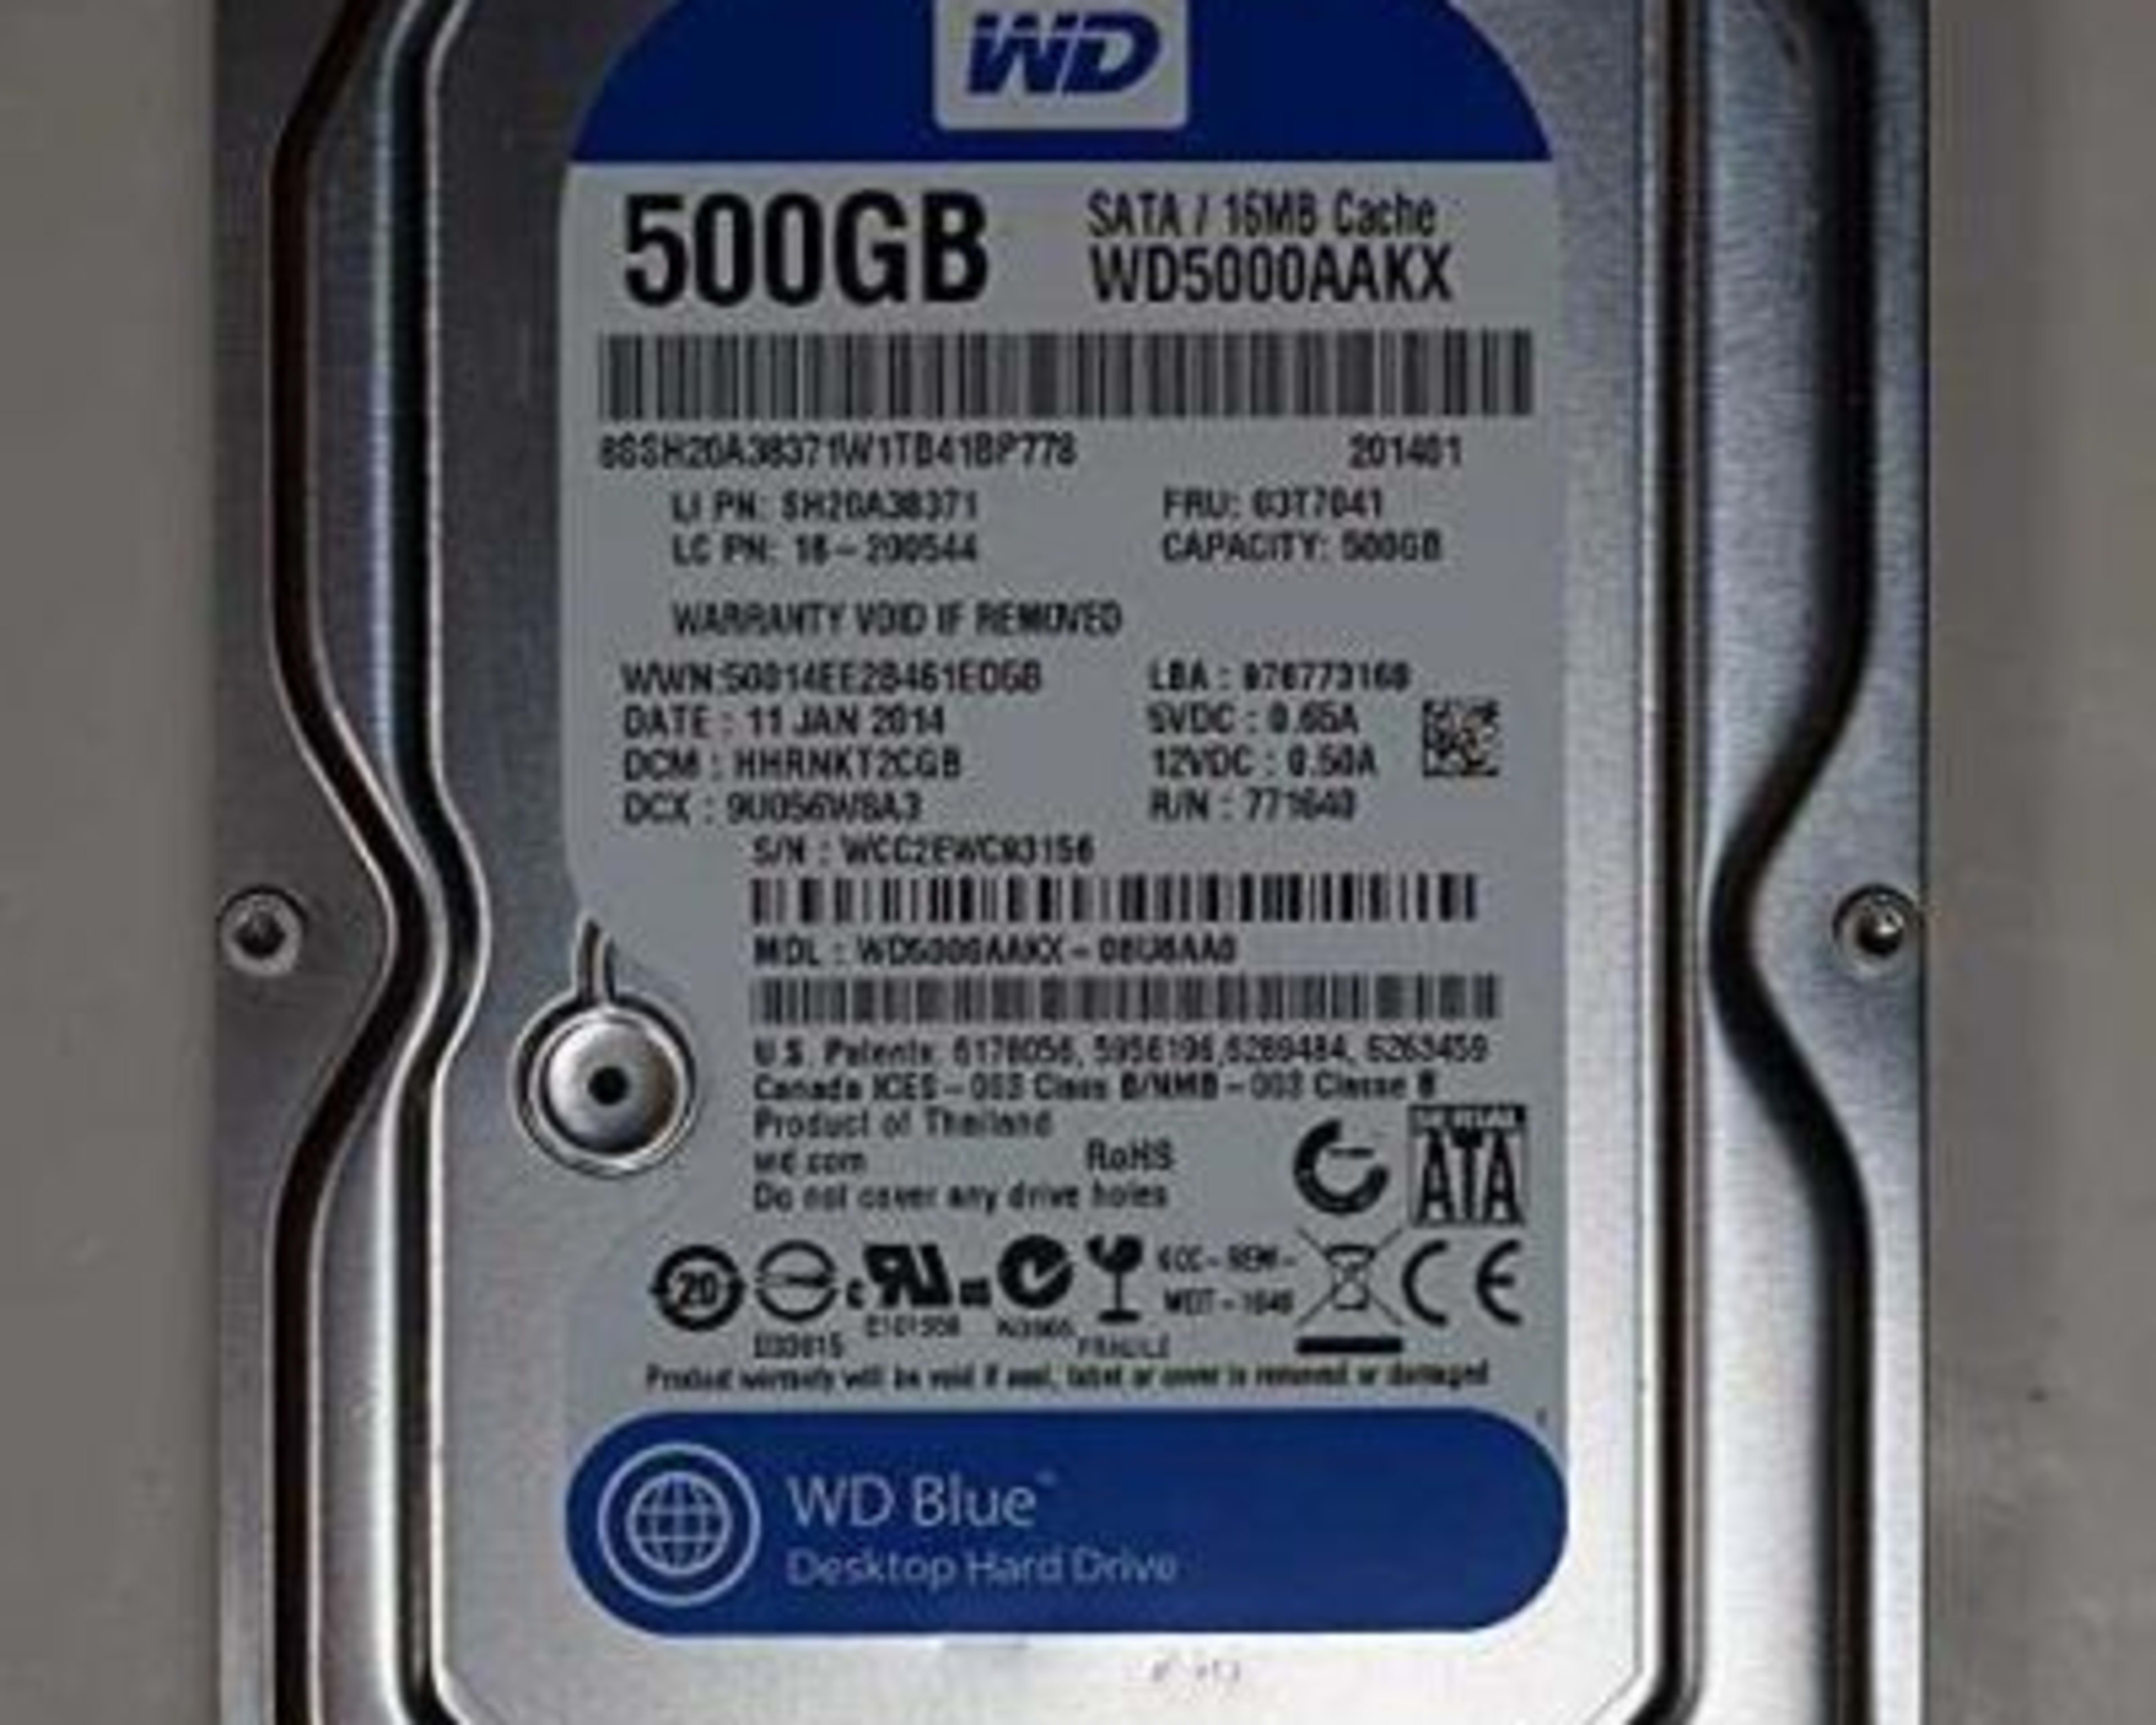 Pre-owned WD Blue 500GB Desktop Hard Disk Drive - 7200 RPM SATA 6 Gb/s 16MB Cache 3.5 Inch